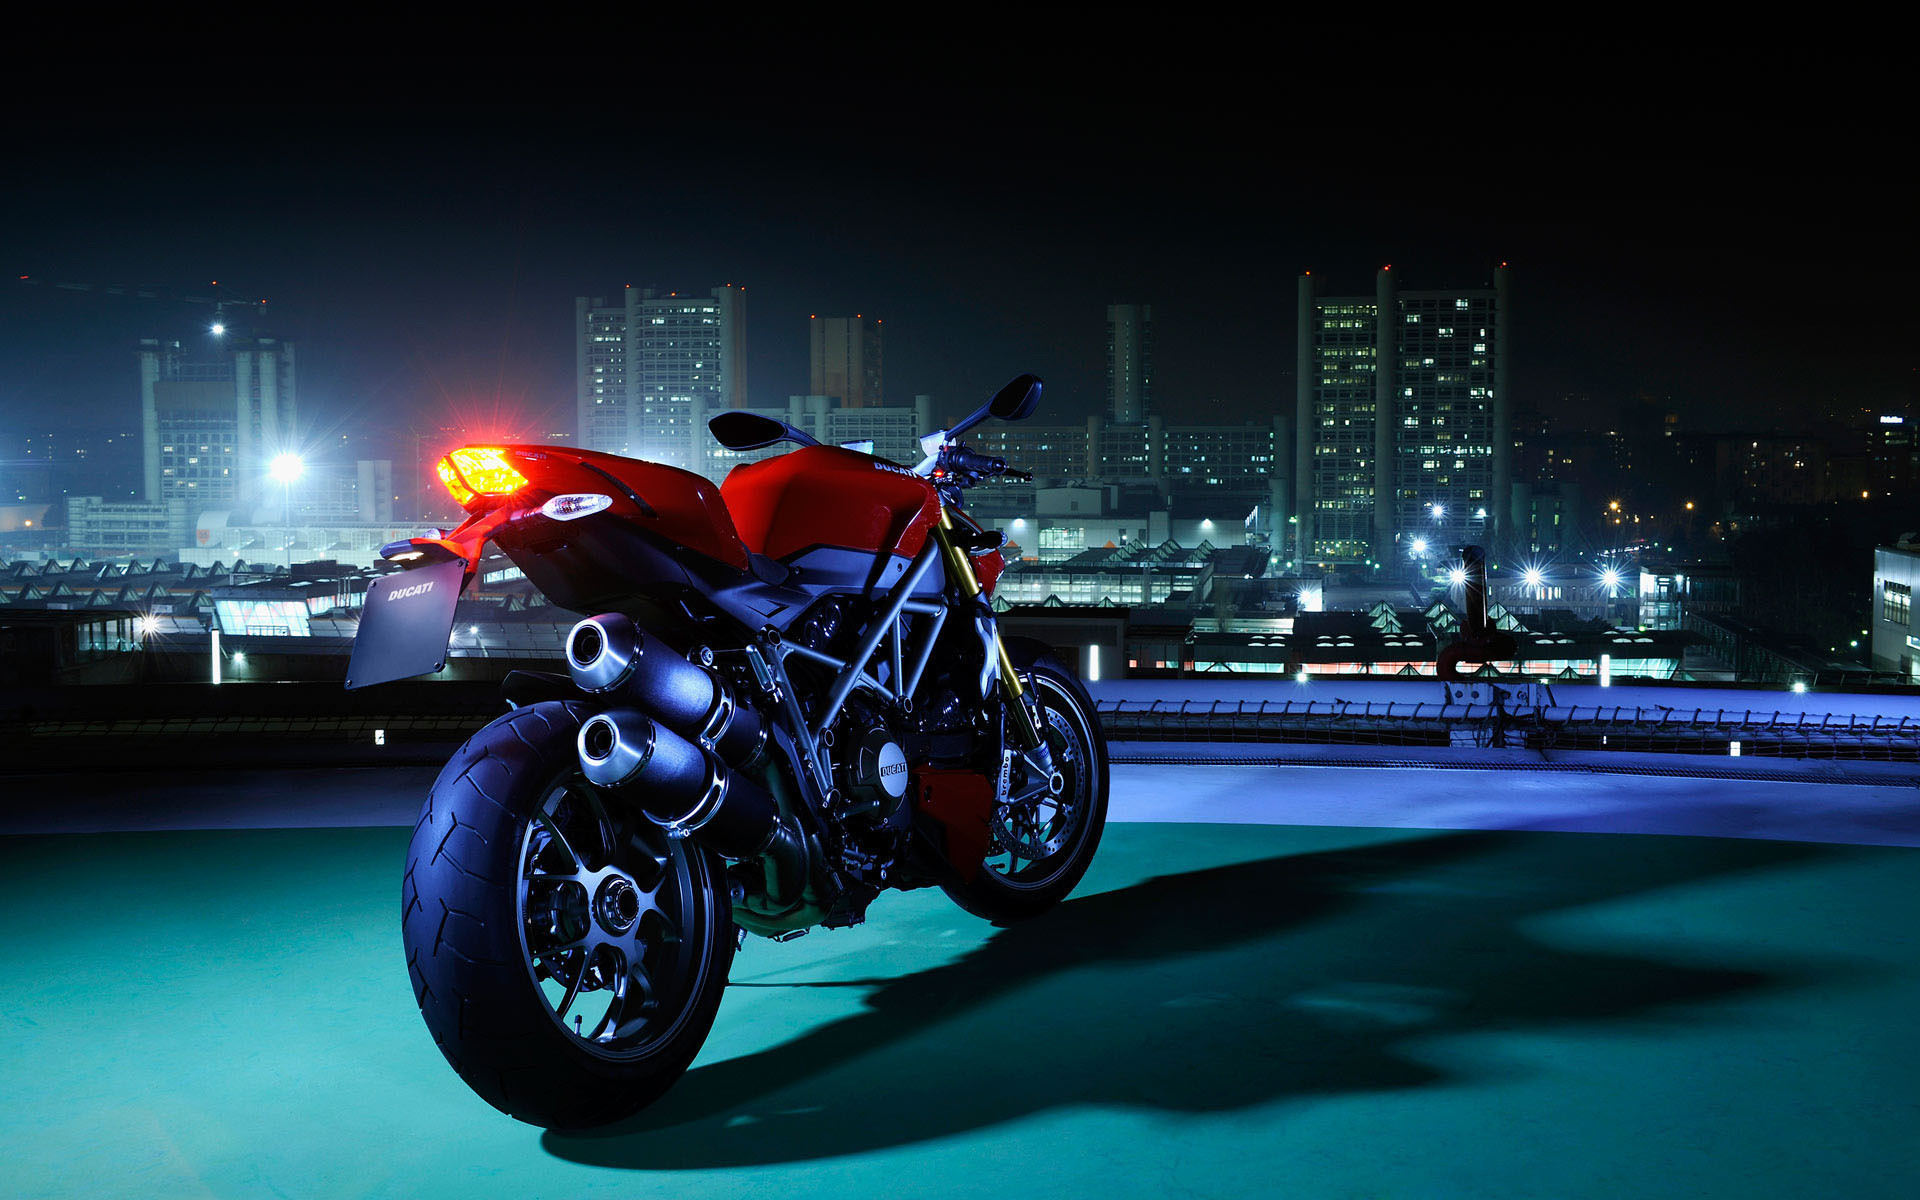 Ducati Monster wallpapers and images   wallpapers pictures photos 1920x1200